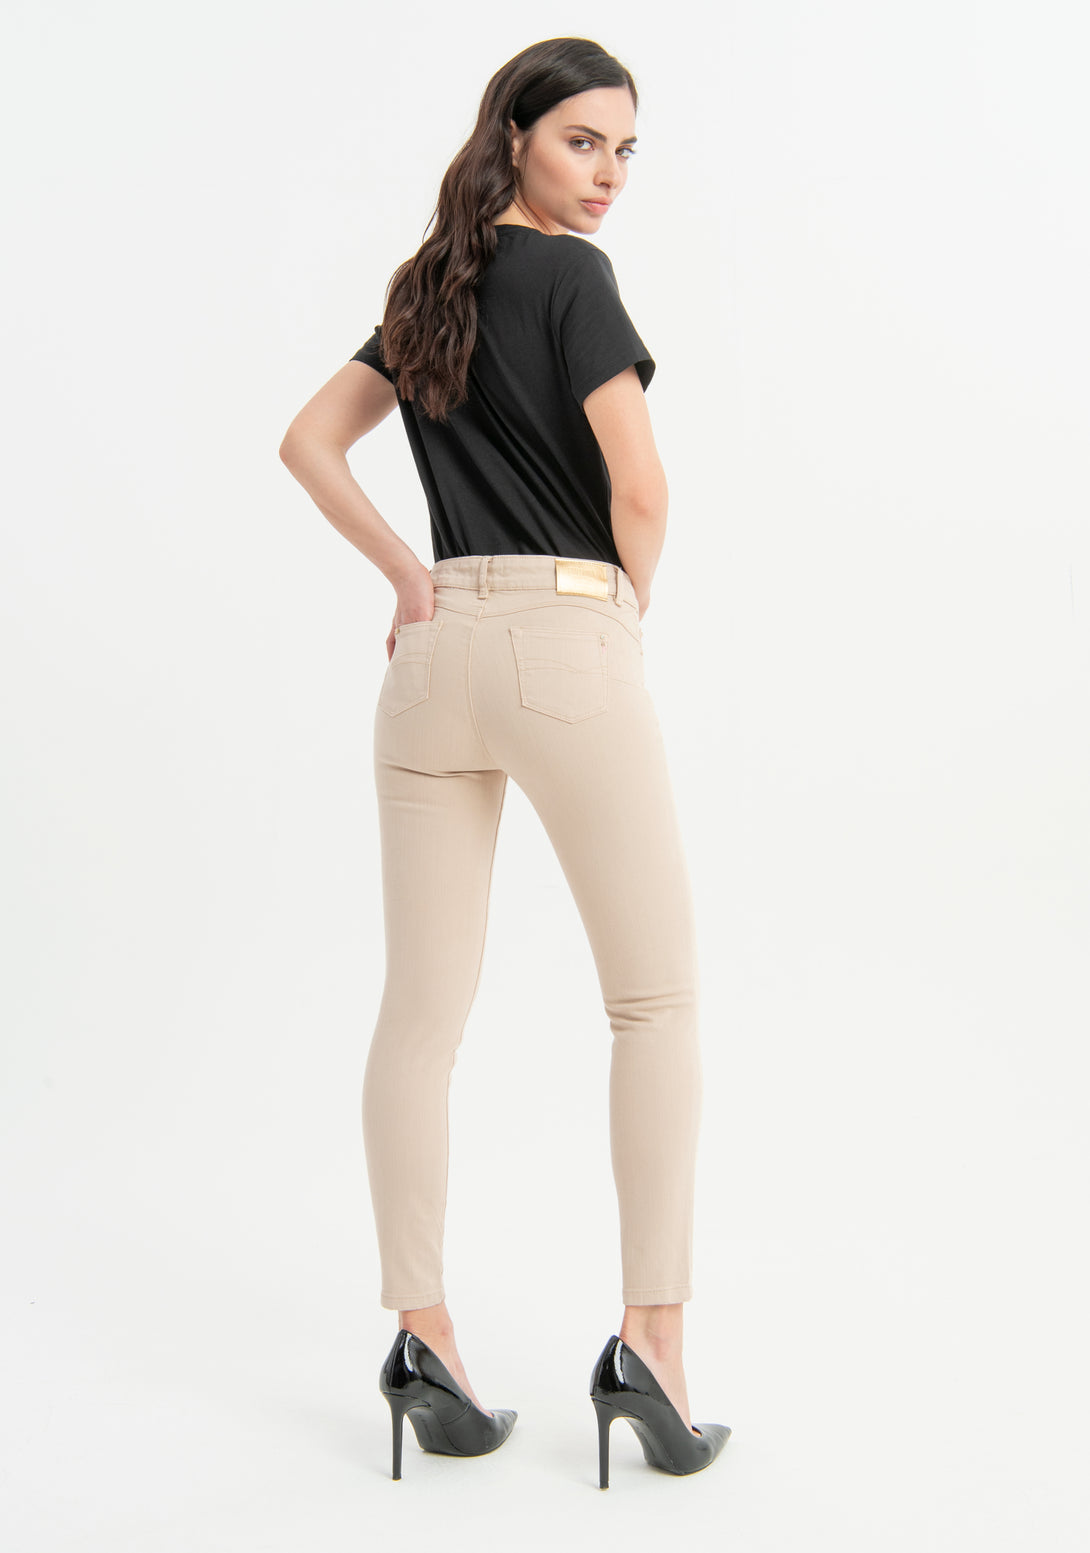 Pant skinny fit with push-up effect made in gabardine